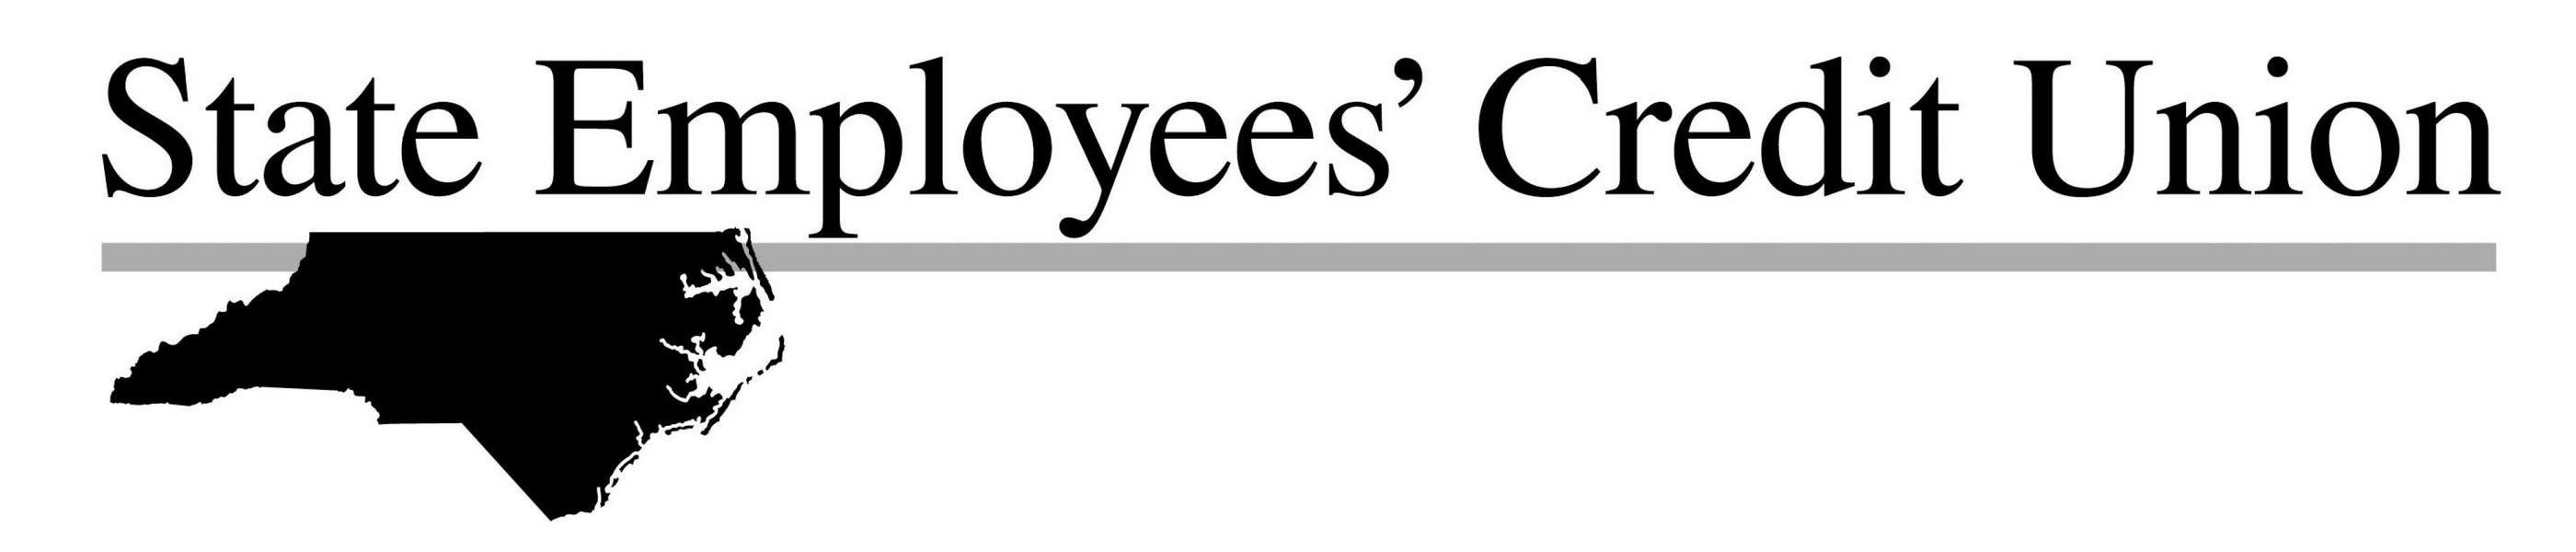 state employees credit union logo